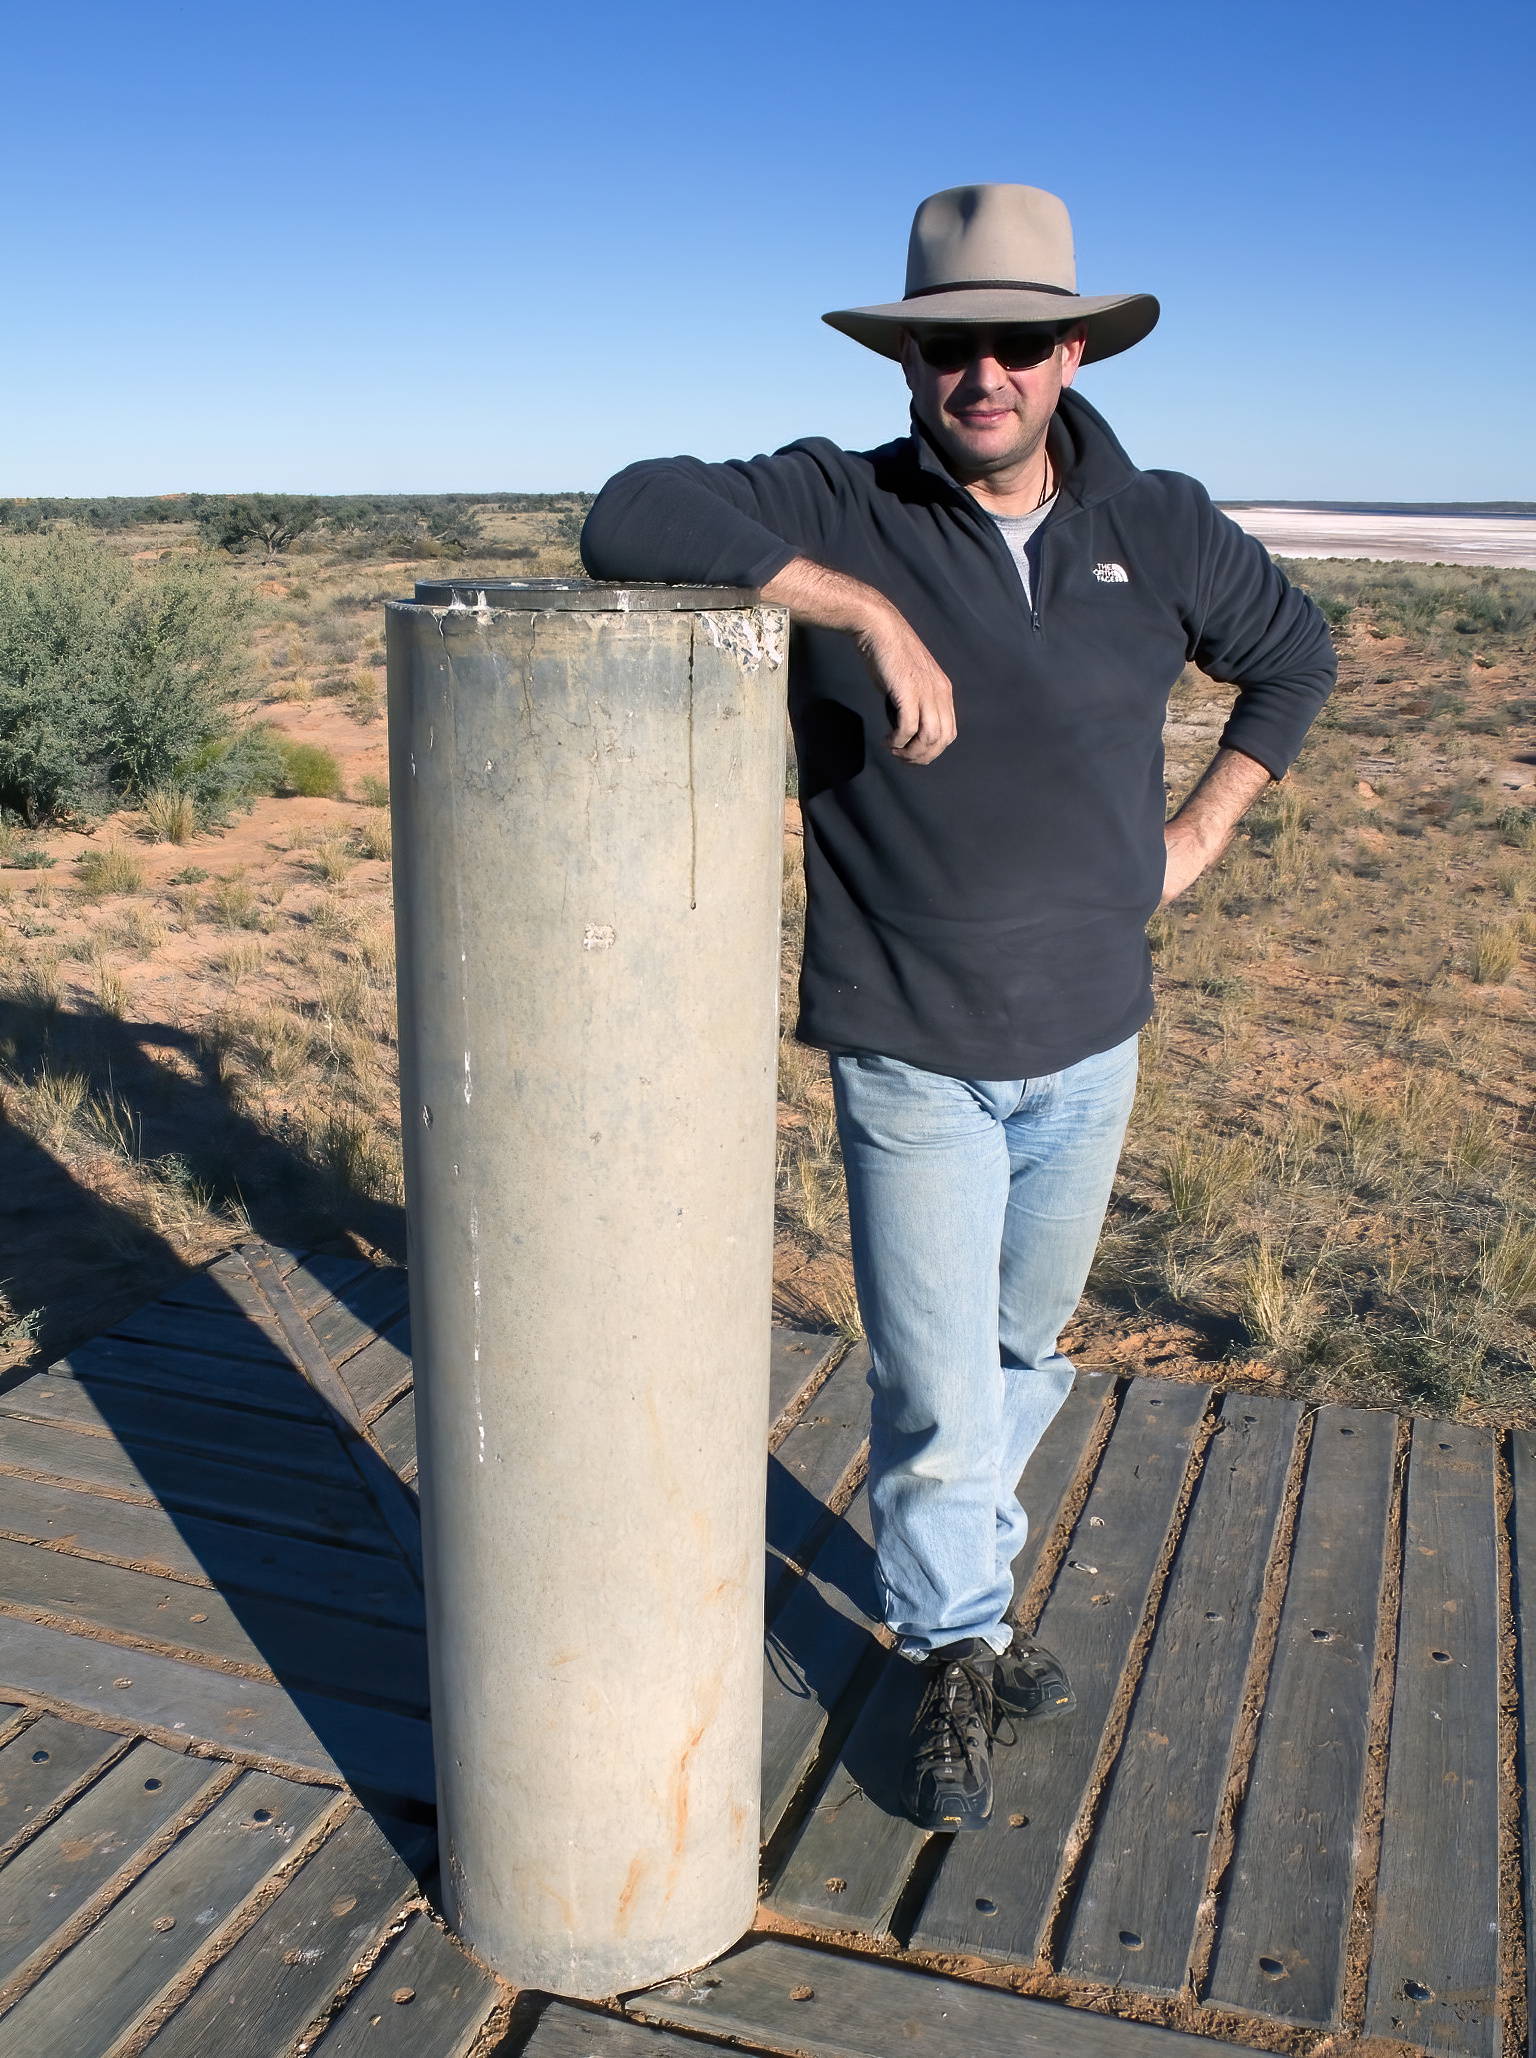 The author posing at Poeppel Corner - where Queensland, South Australia and the Northern Territory borders meet.